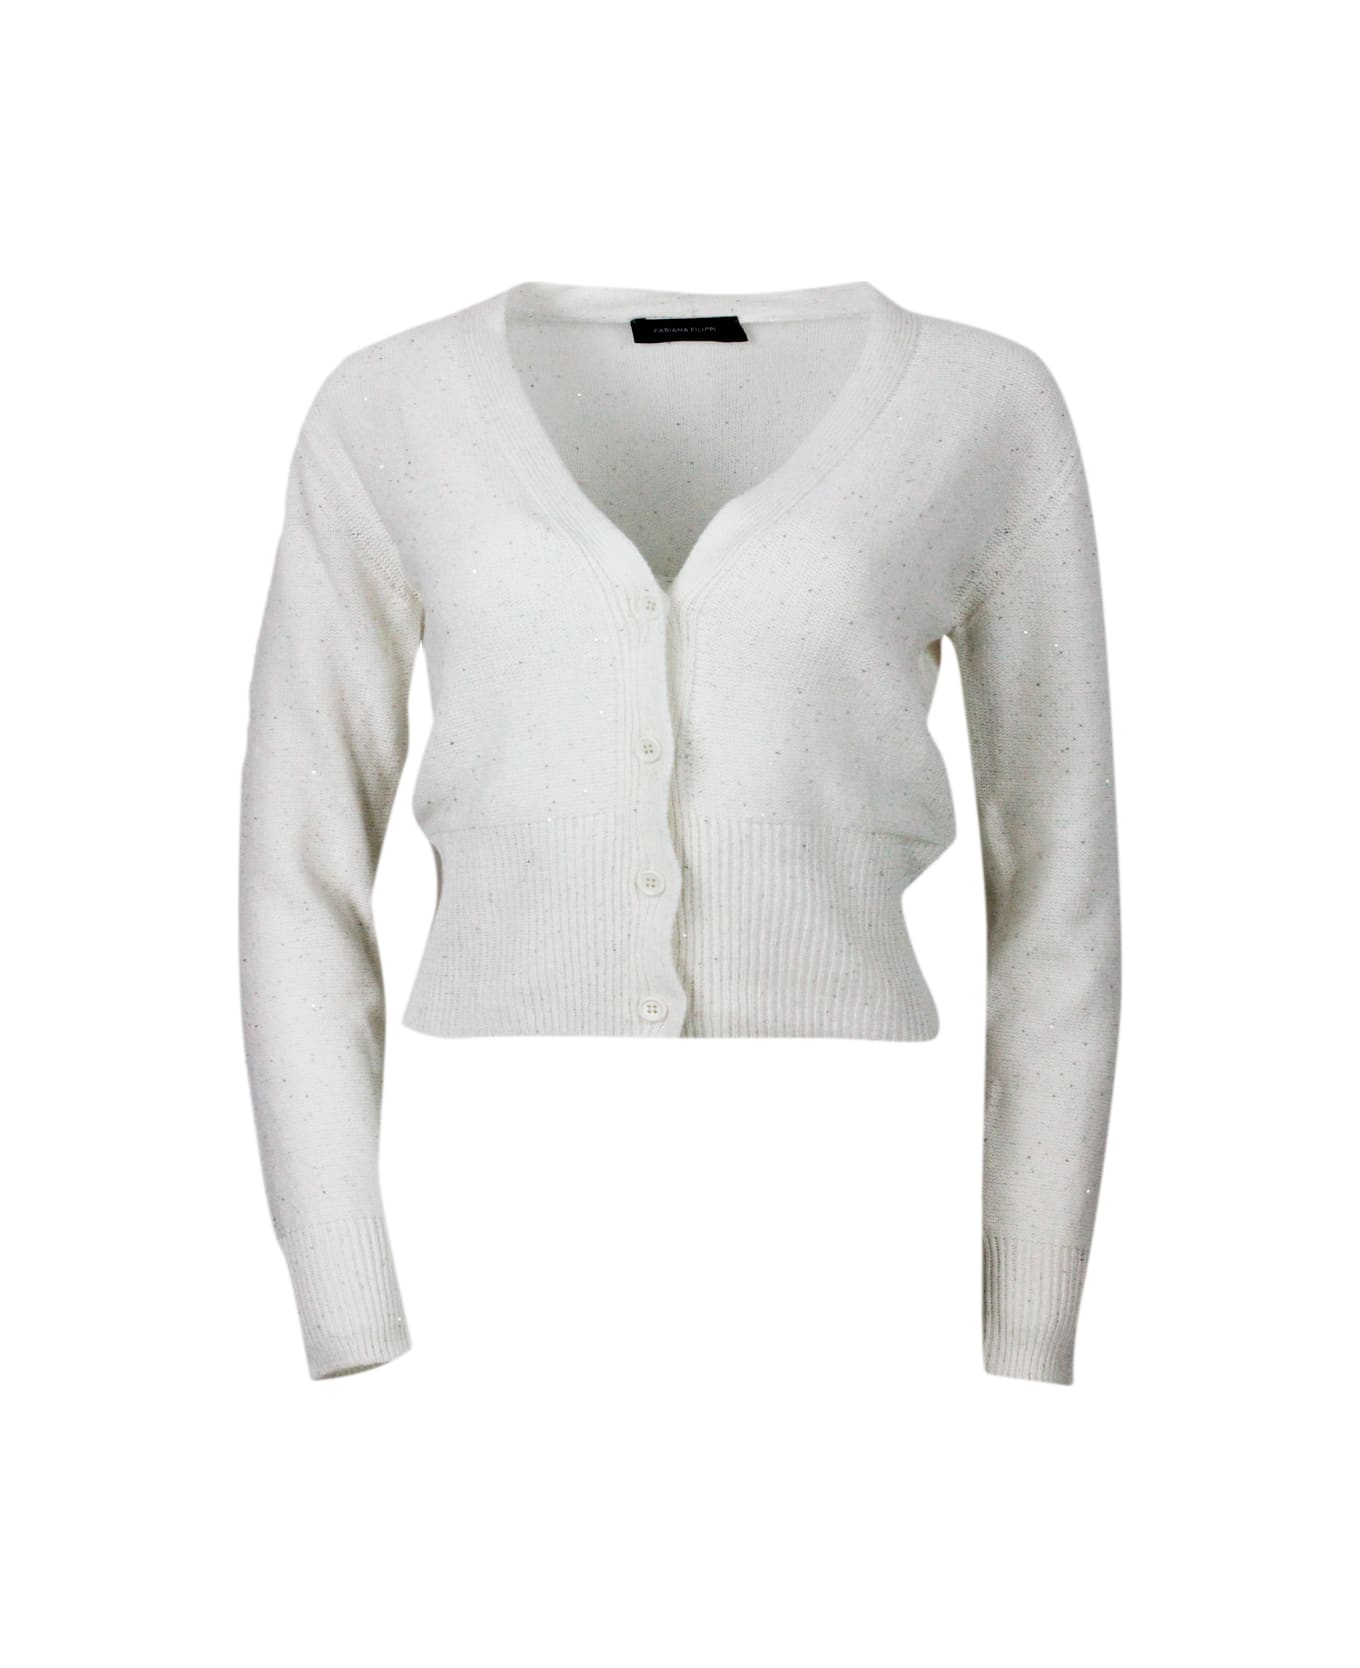 Fabiana Filippi Cardigan Sweater With Button Closure Embellished With Brilliant Applied Microsequins - cream カーディガン